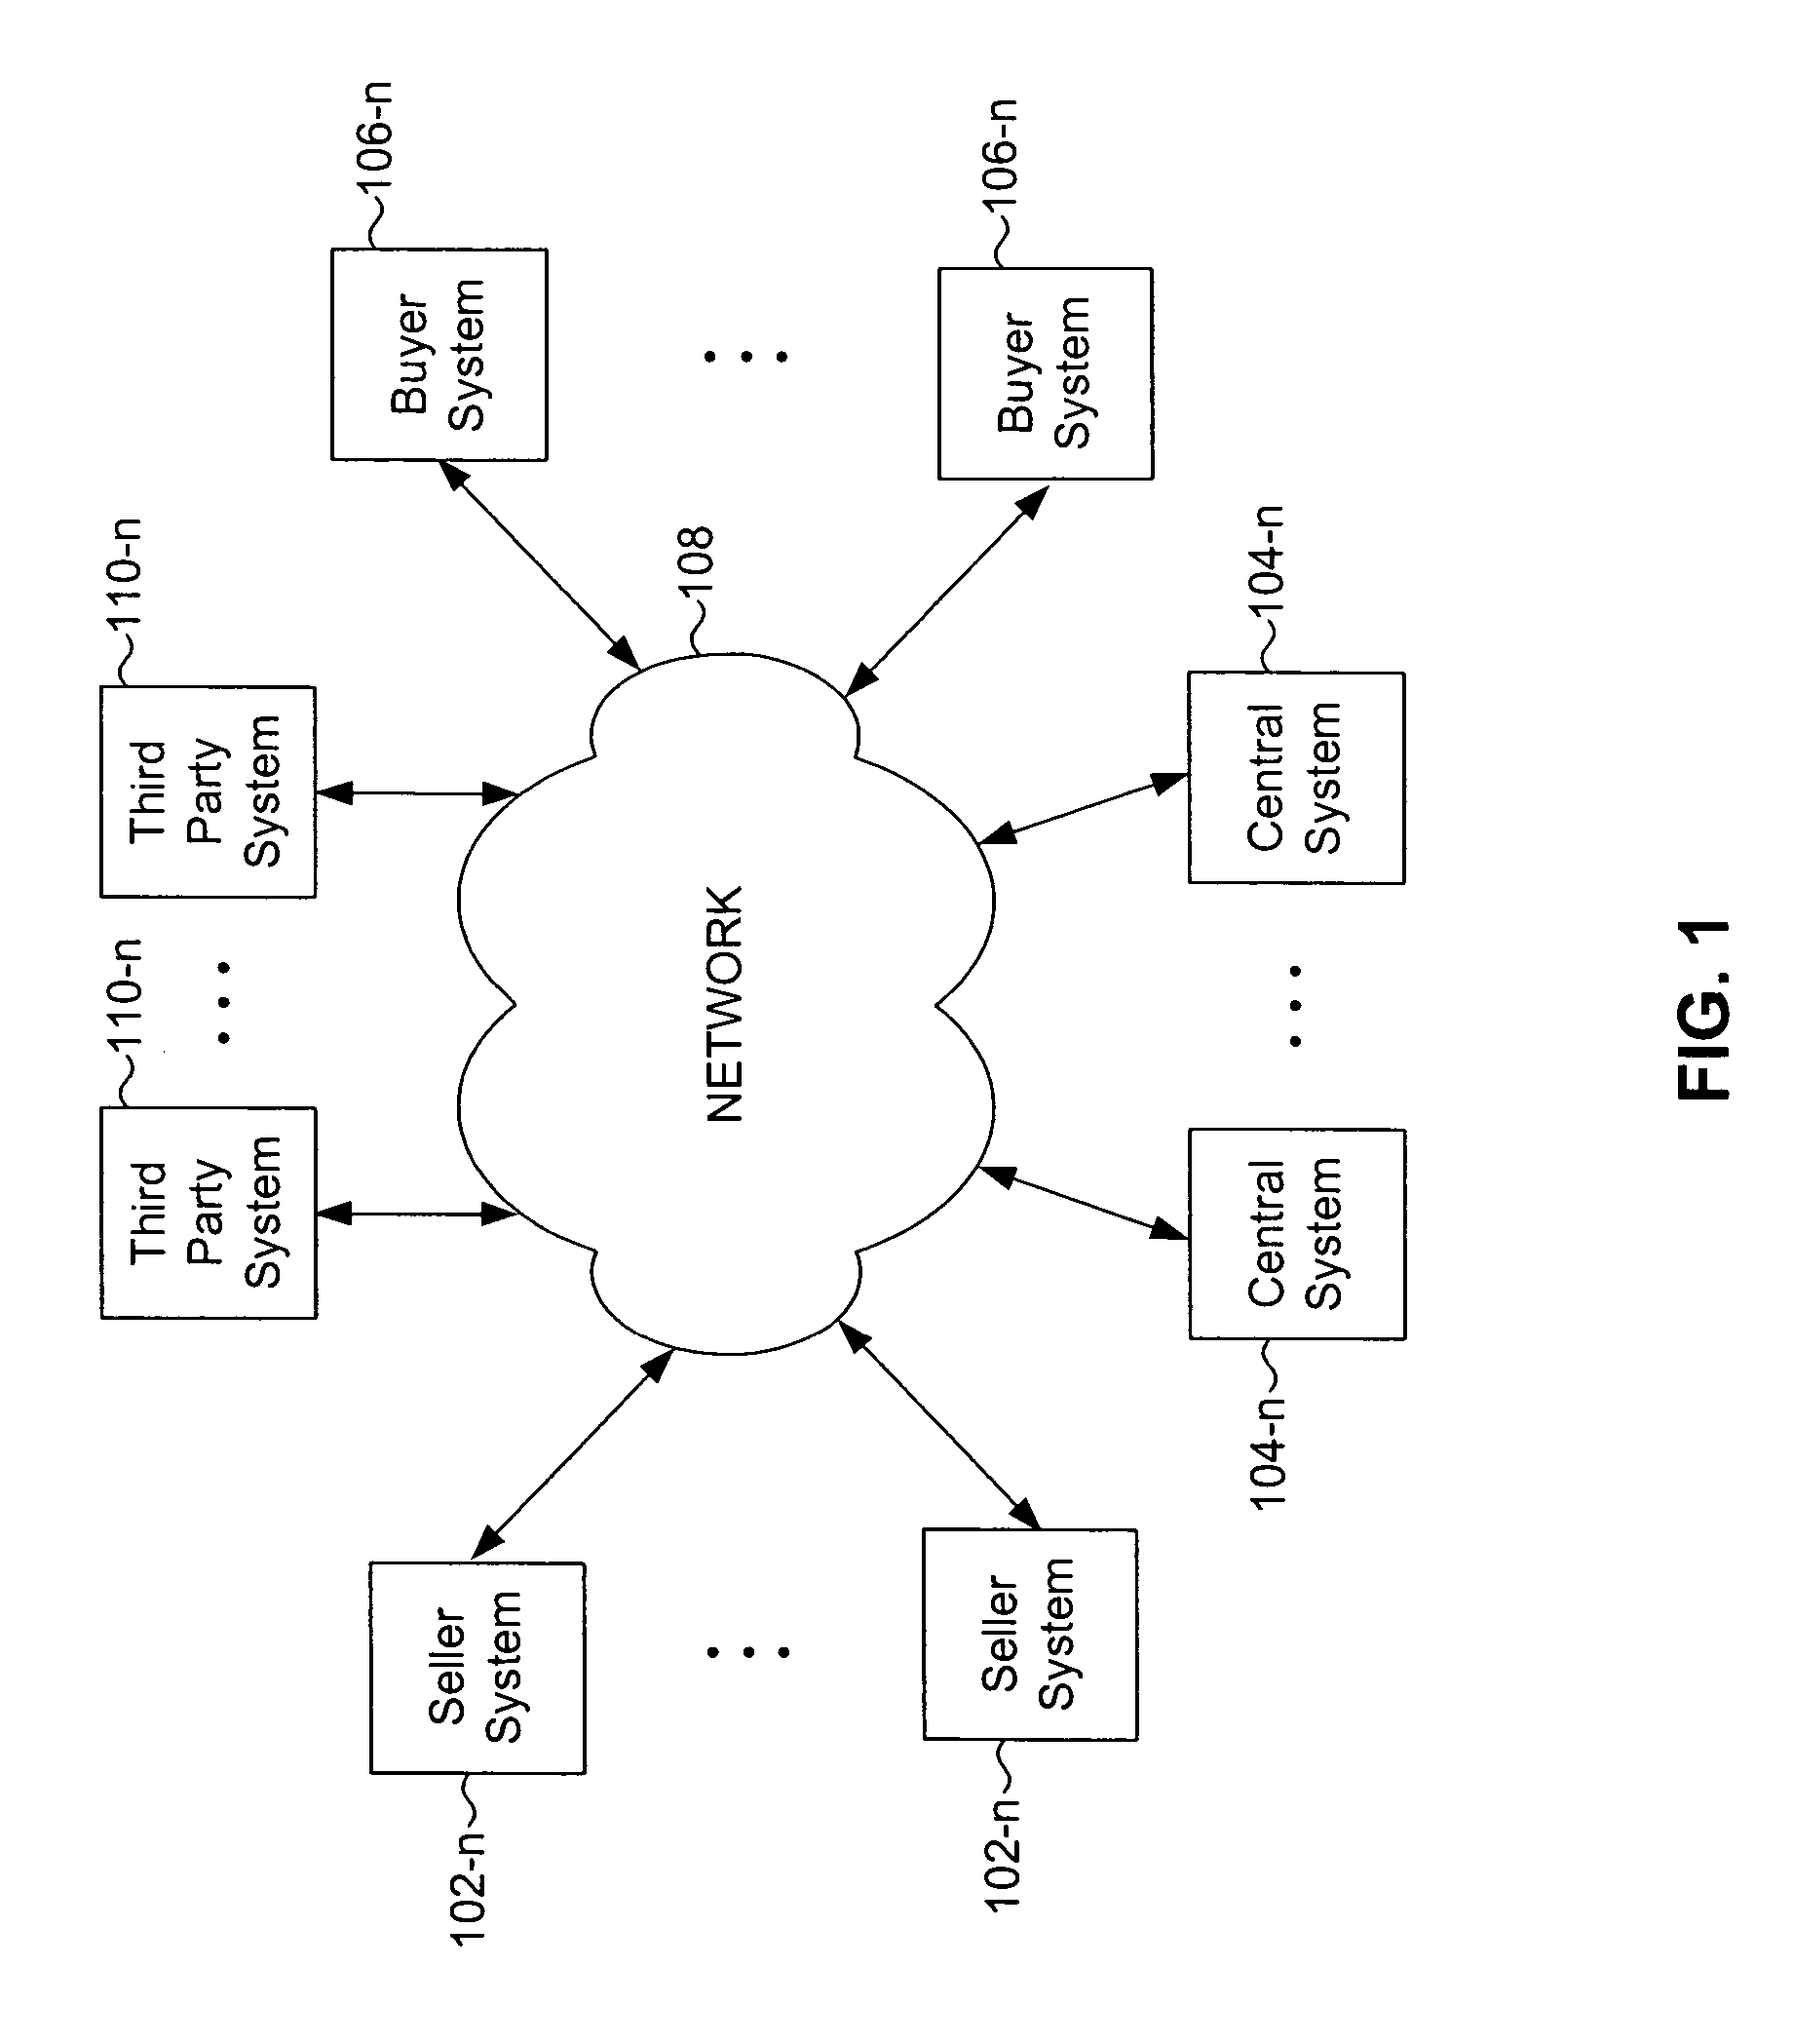 System, method, and computer program product for automated consolidating and updating of inventory from multiple sellers for access by multiple buyers